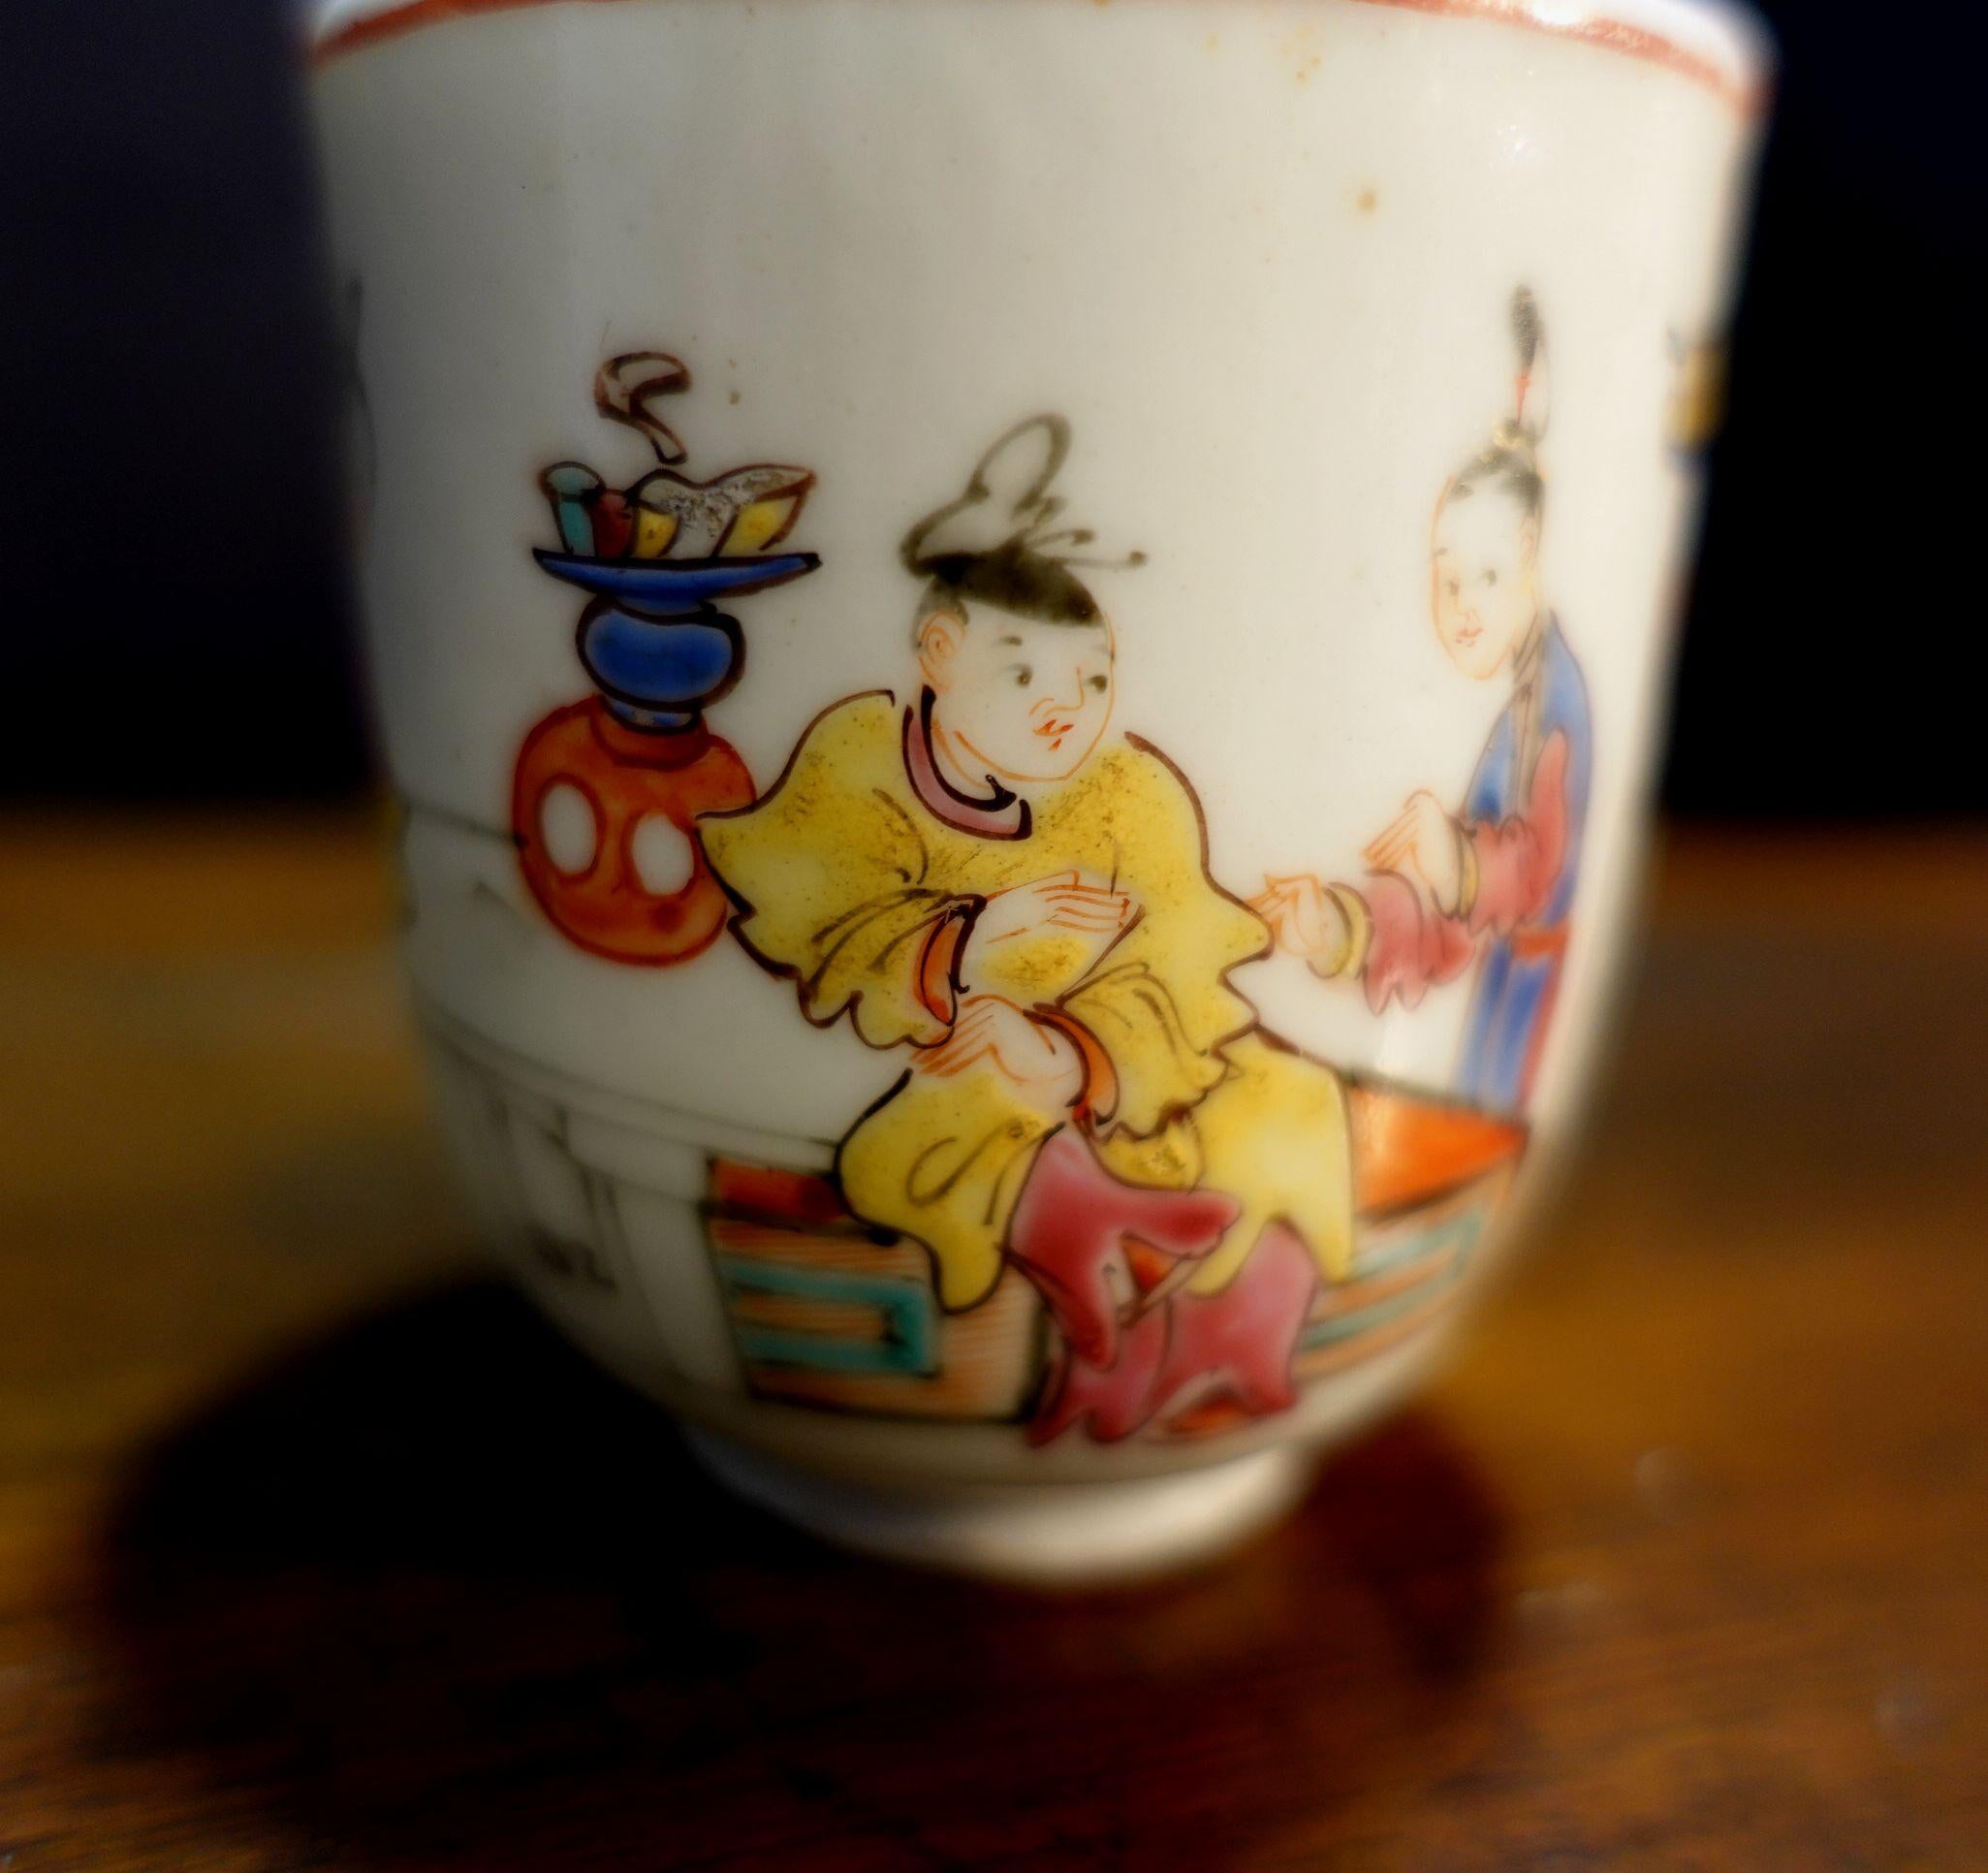 Porcelain Antique Cup from 18th Century China